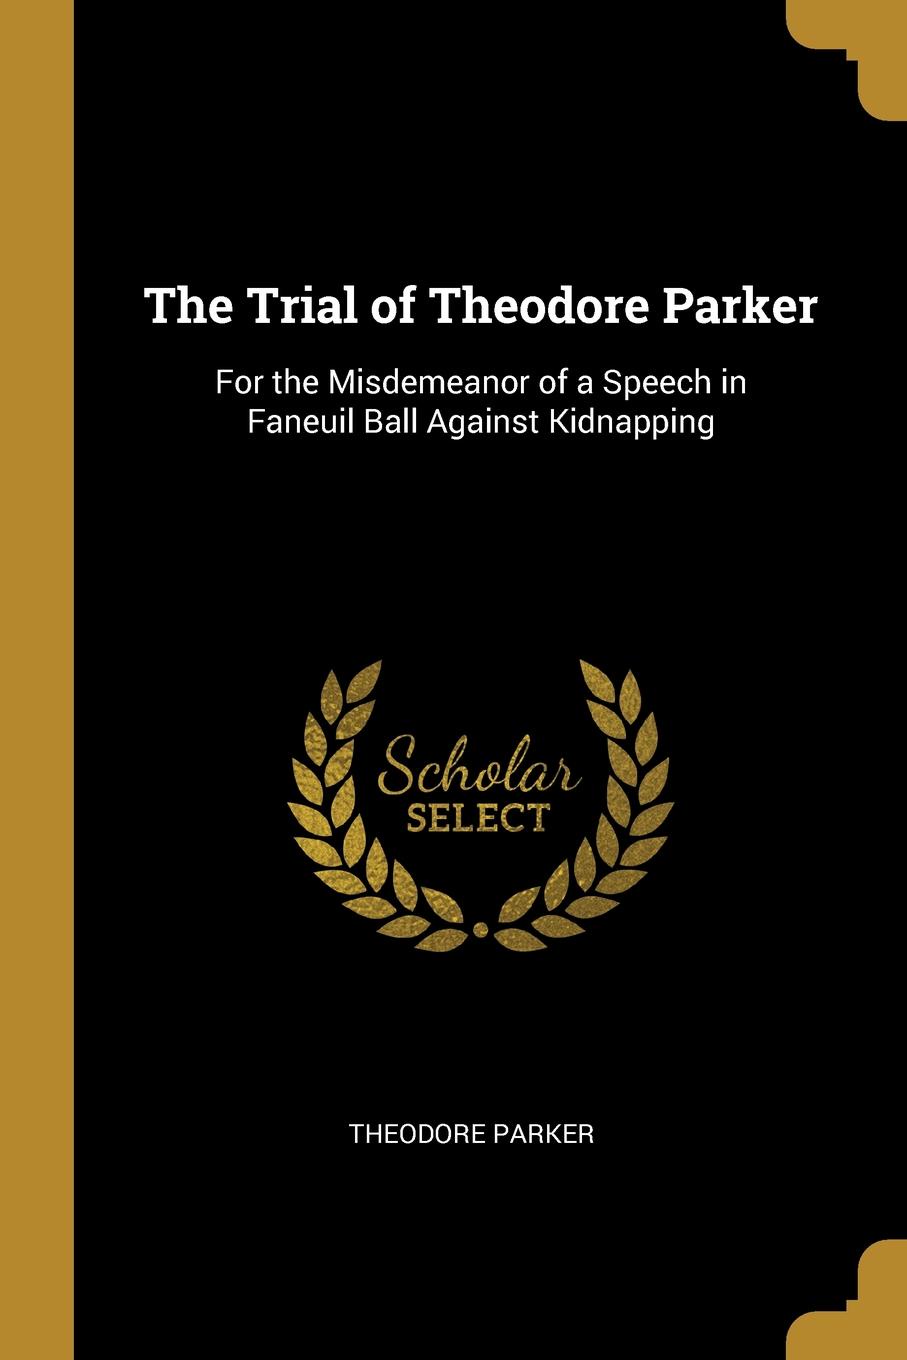 The Trial of Theodore Parker. For the Misdemeanor of a Speech in Faneuil Ball Against Kidnapping